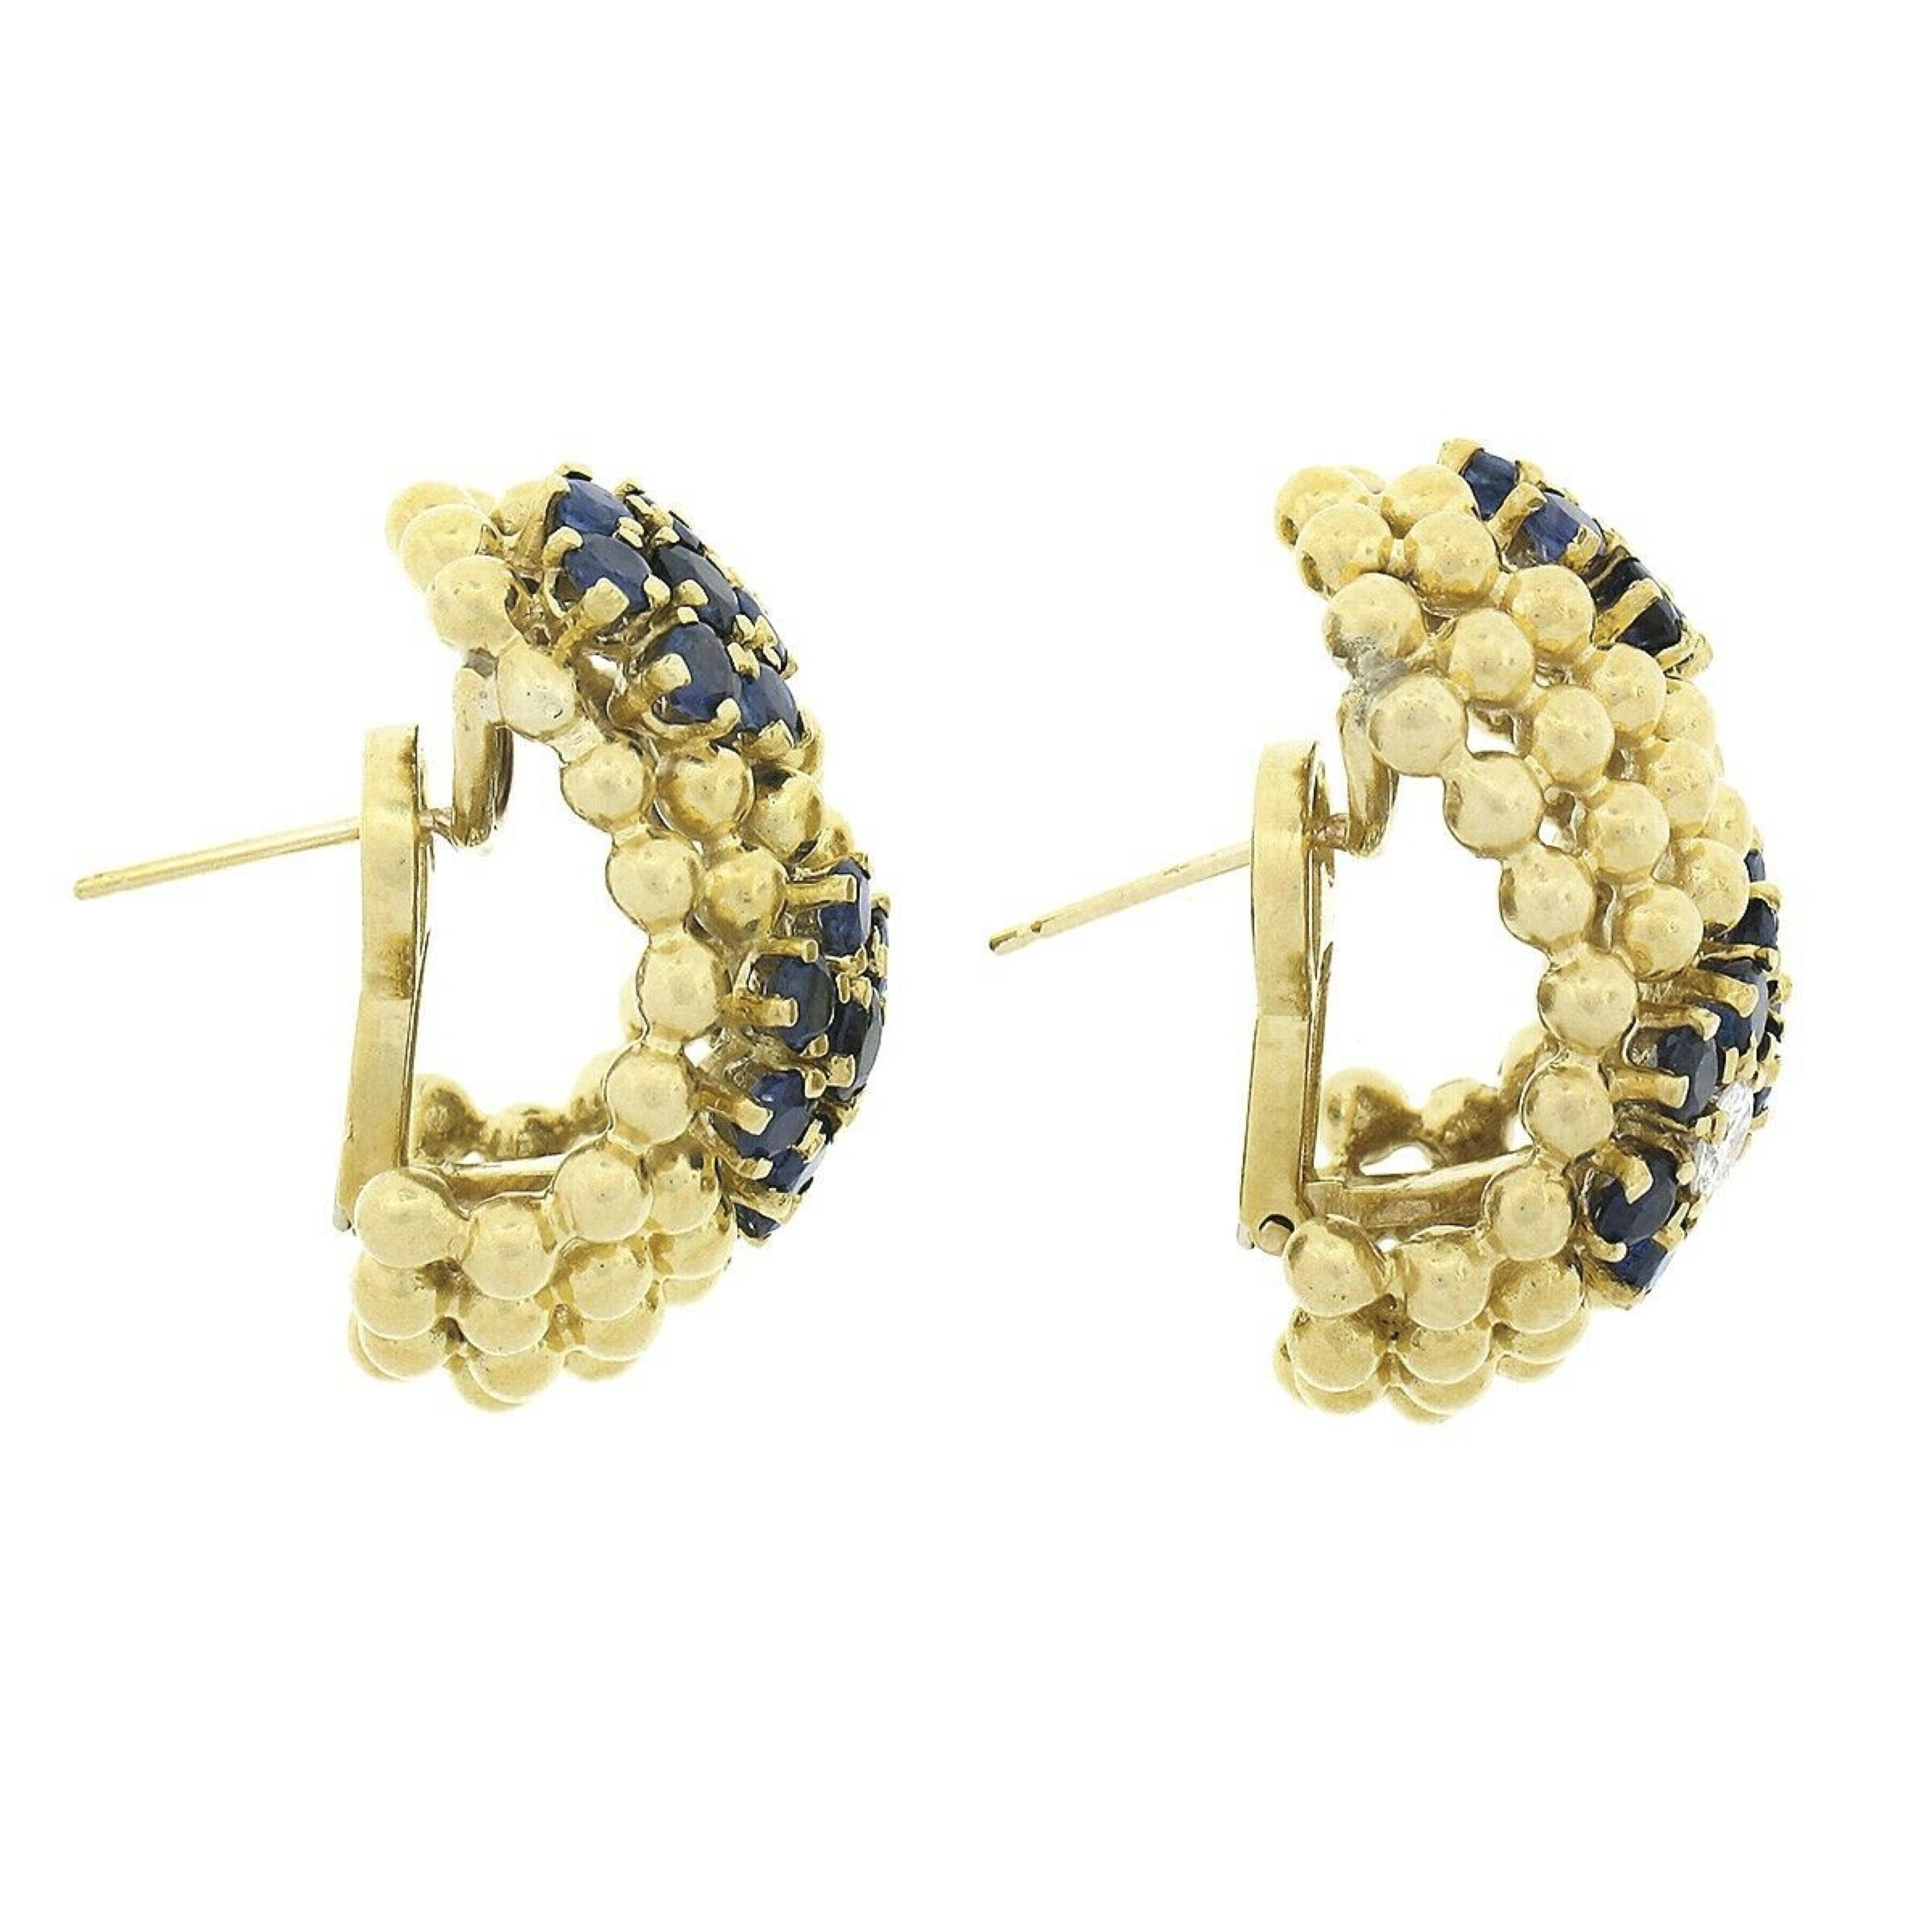 Vintage 18k Gold 4.67ctw Sapphire & Diamond Flower 7 Row Bead Wide Cuff Earrings In Good Condition For Sale In Montclair, NJ